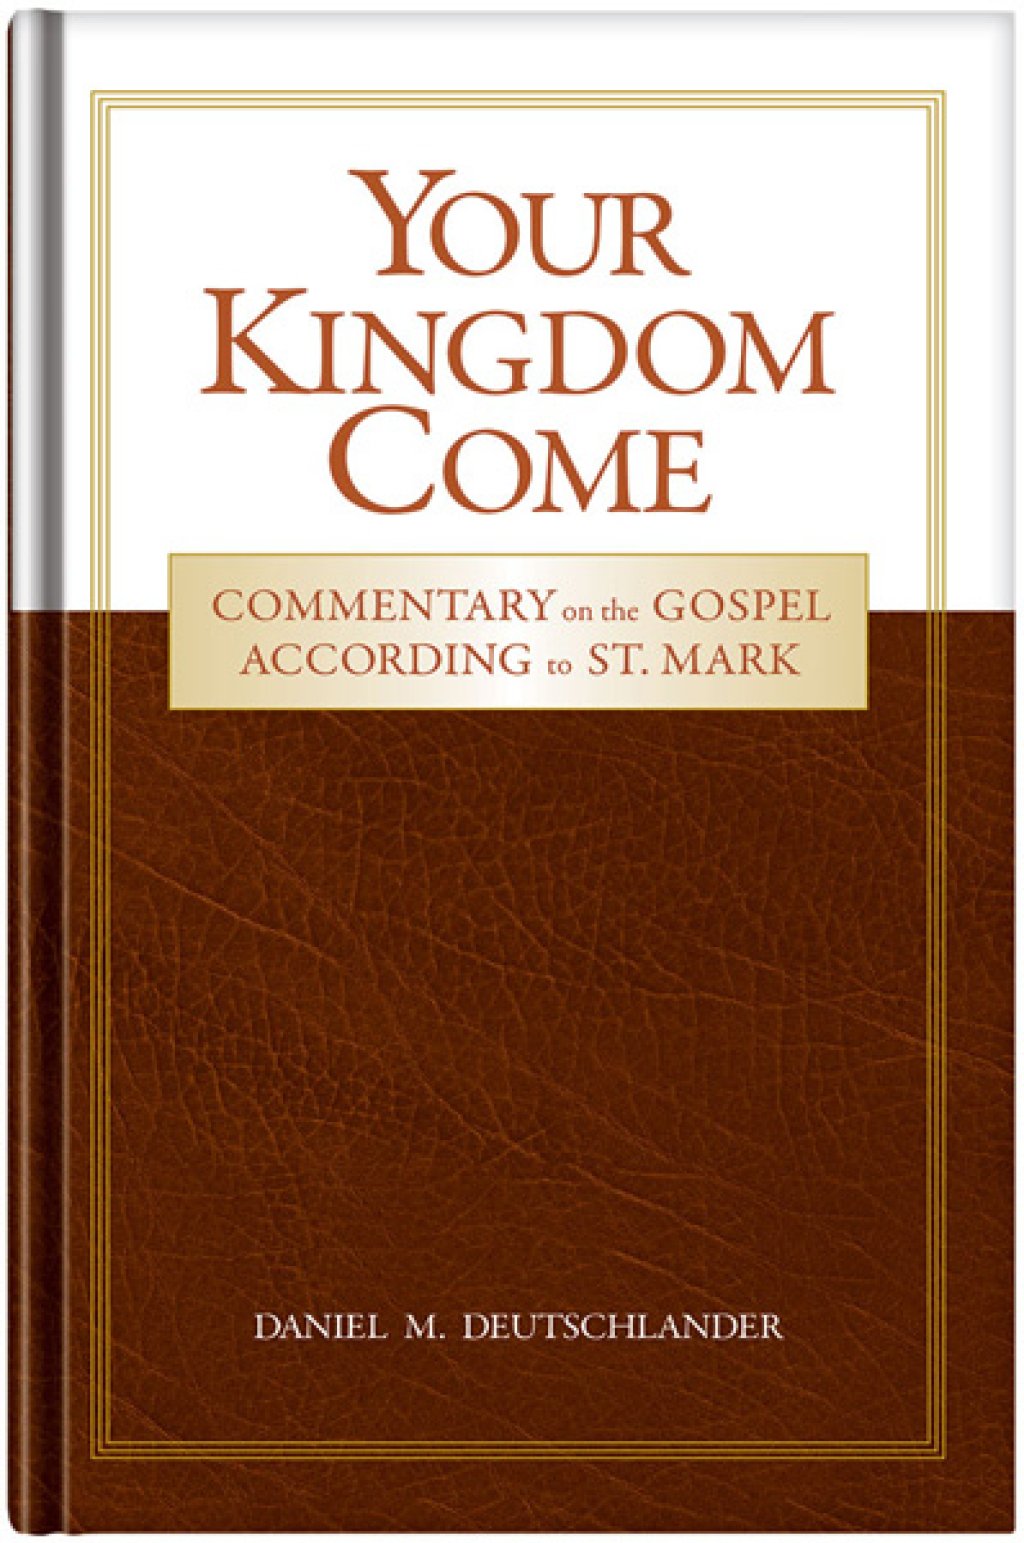 Your Kingdom Come - Commentary on the Gospel According to St. Mark.